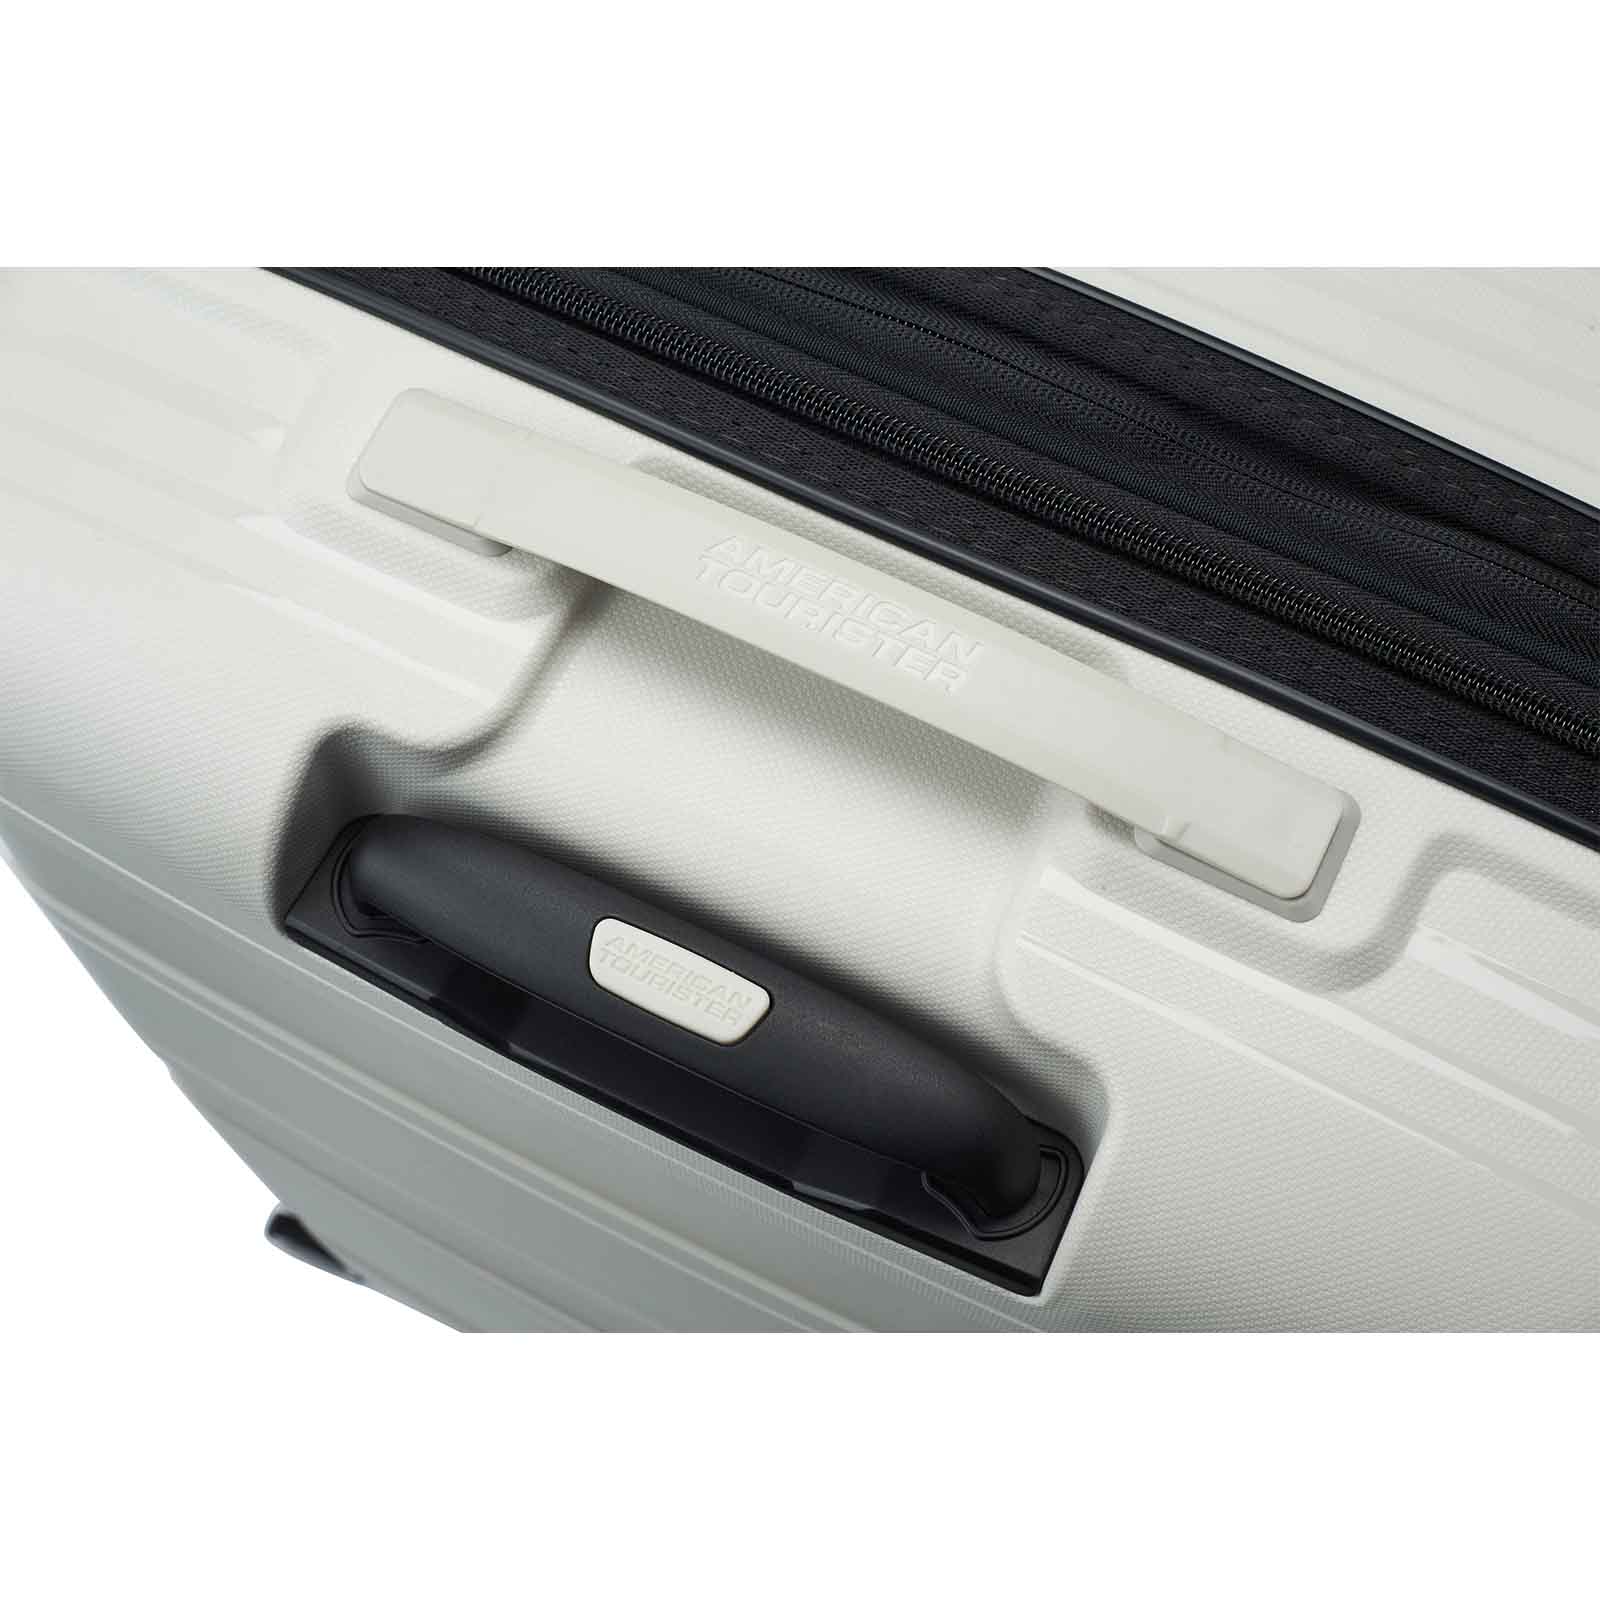 American-Tourister-Light-Max-69cm-Suitcase-Off-White-Trolley